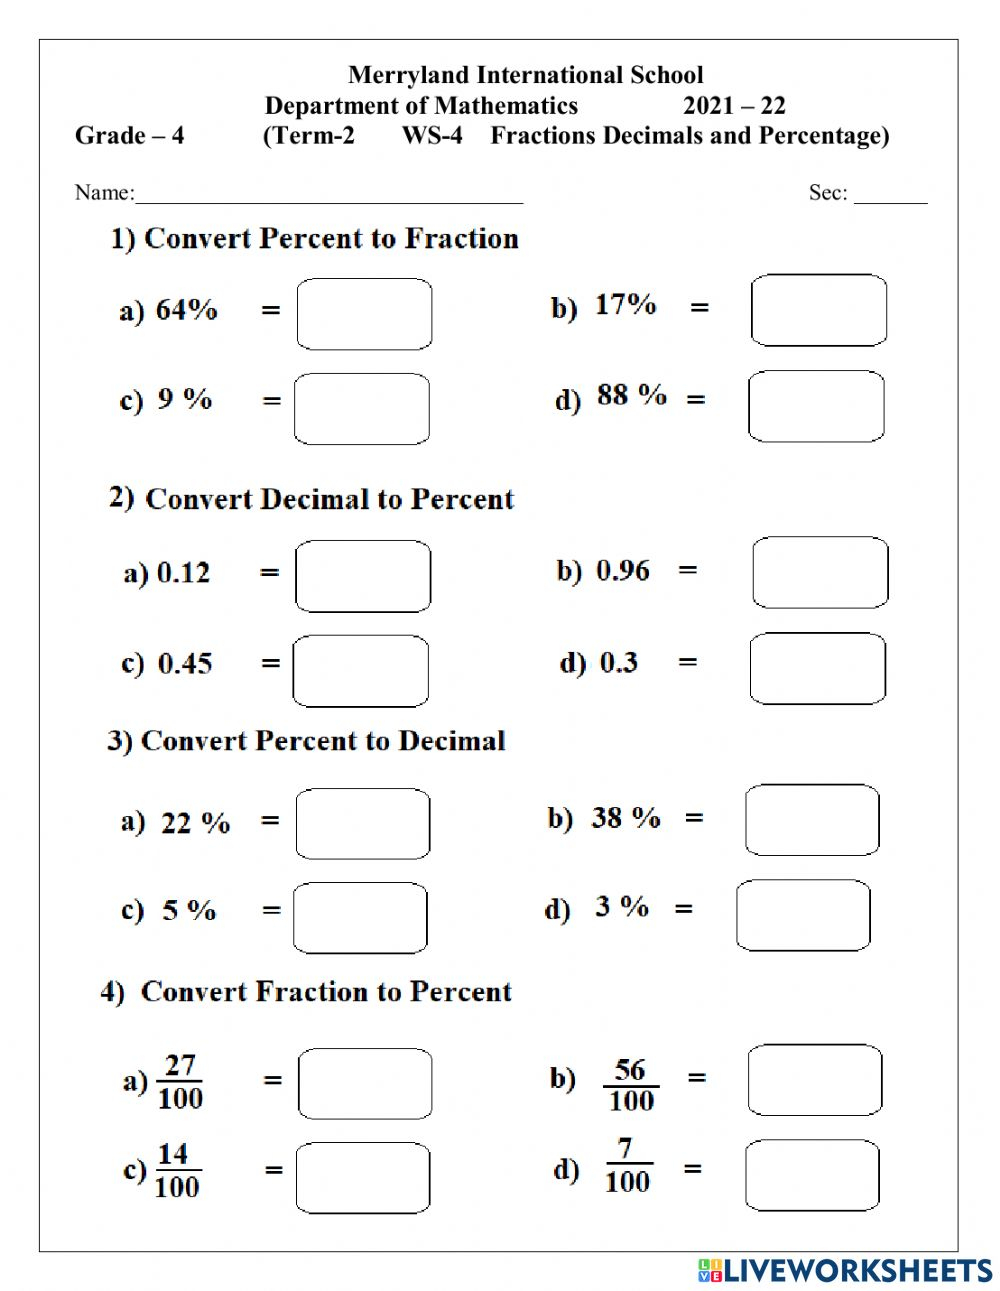 problem solving with fractions decimals and percentages worksheets pdf